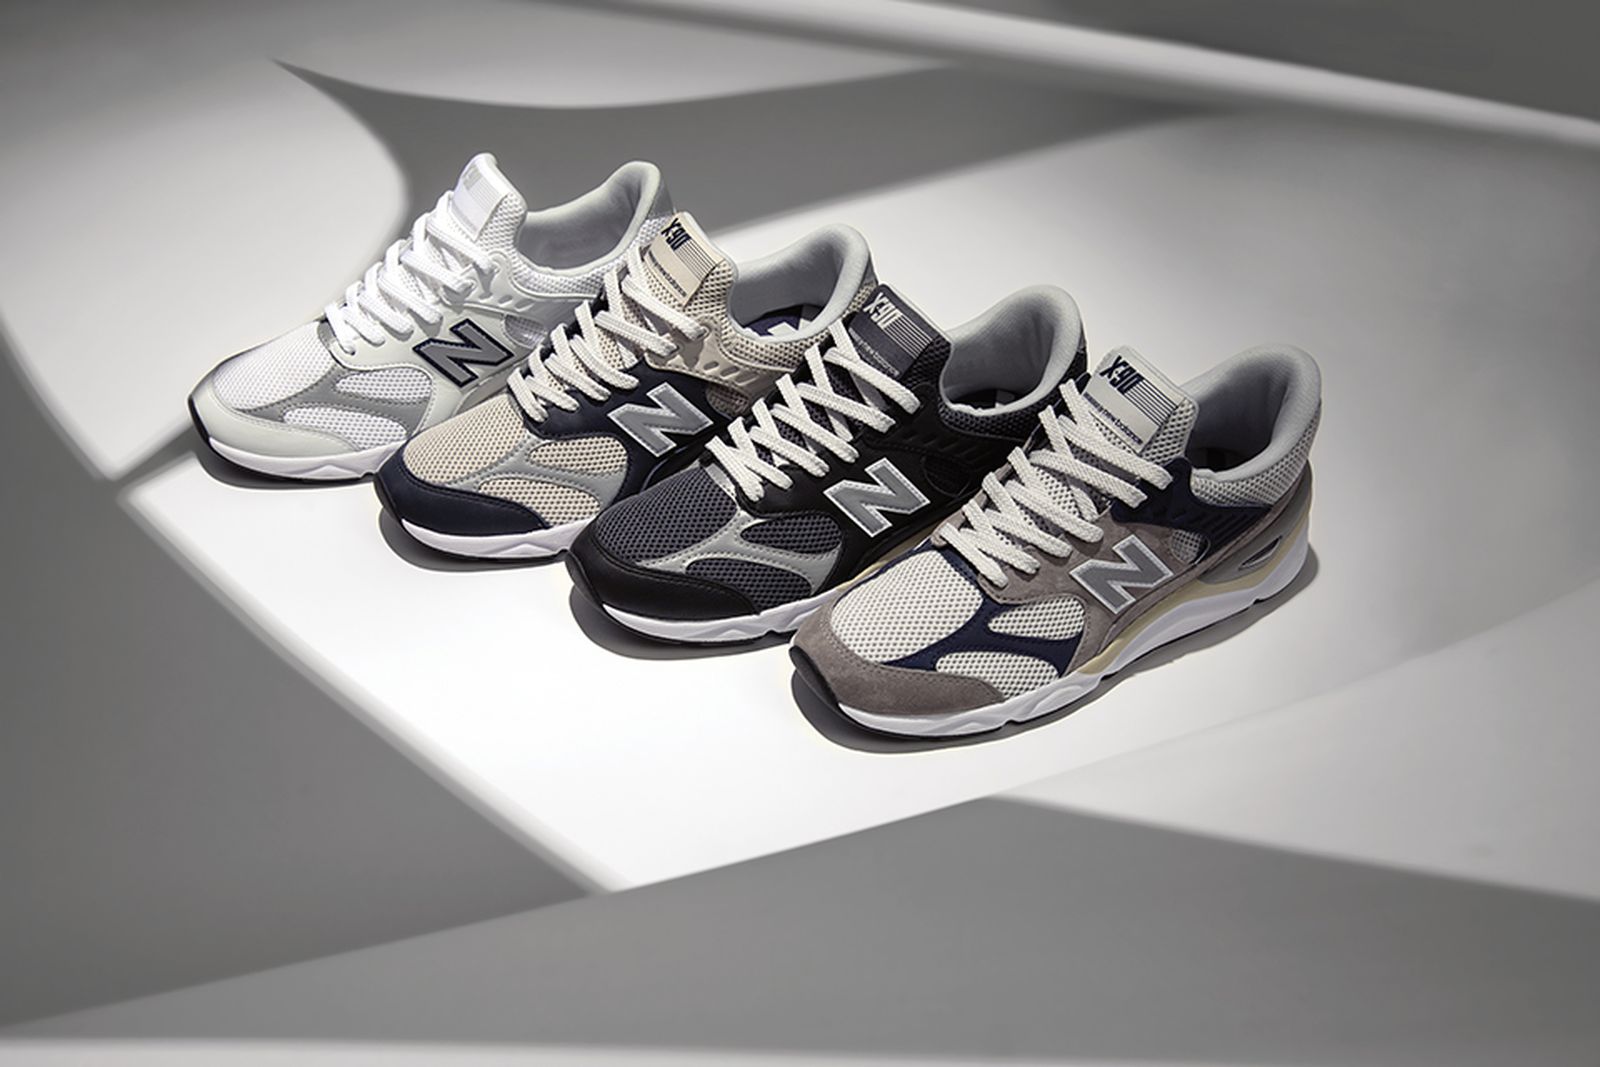 New Balance "Reconstructed" Pack: & More